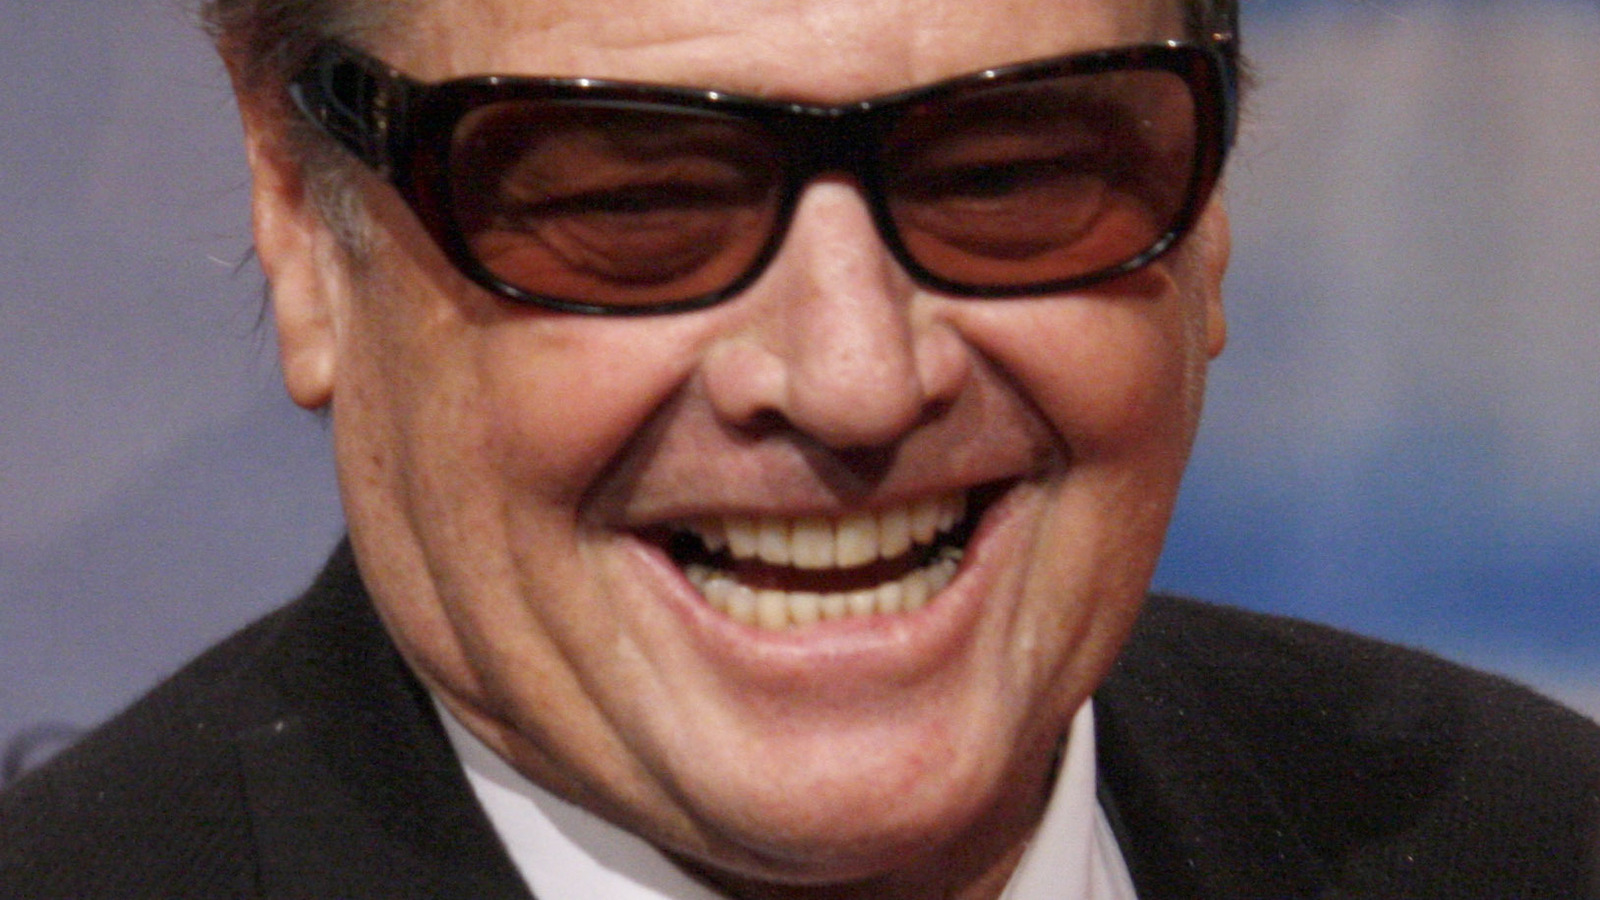 Jack Nicholson’s Golf Club Incident You Might Not Remember